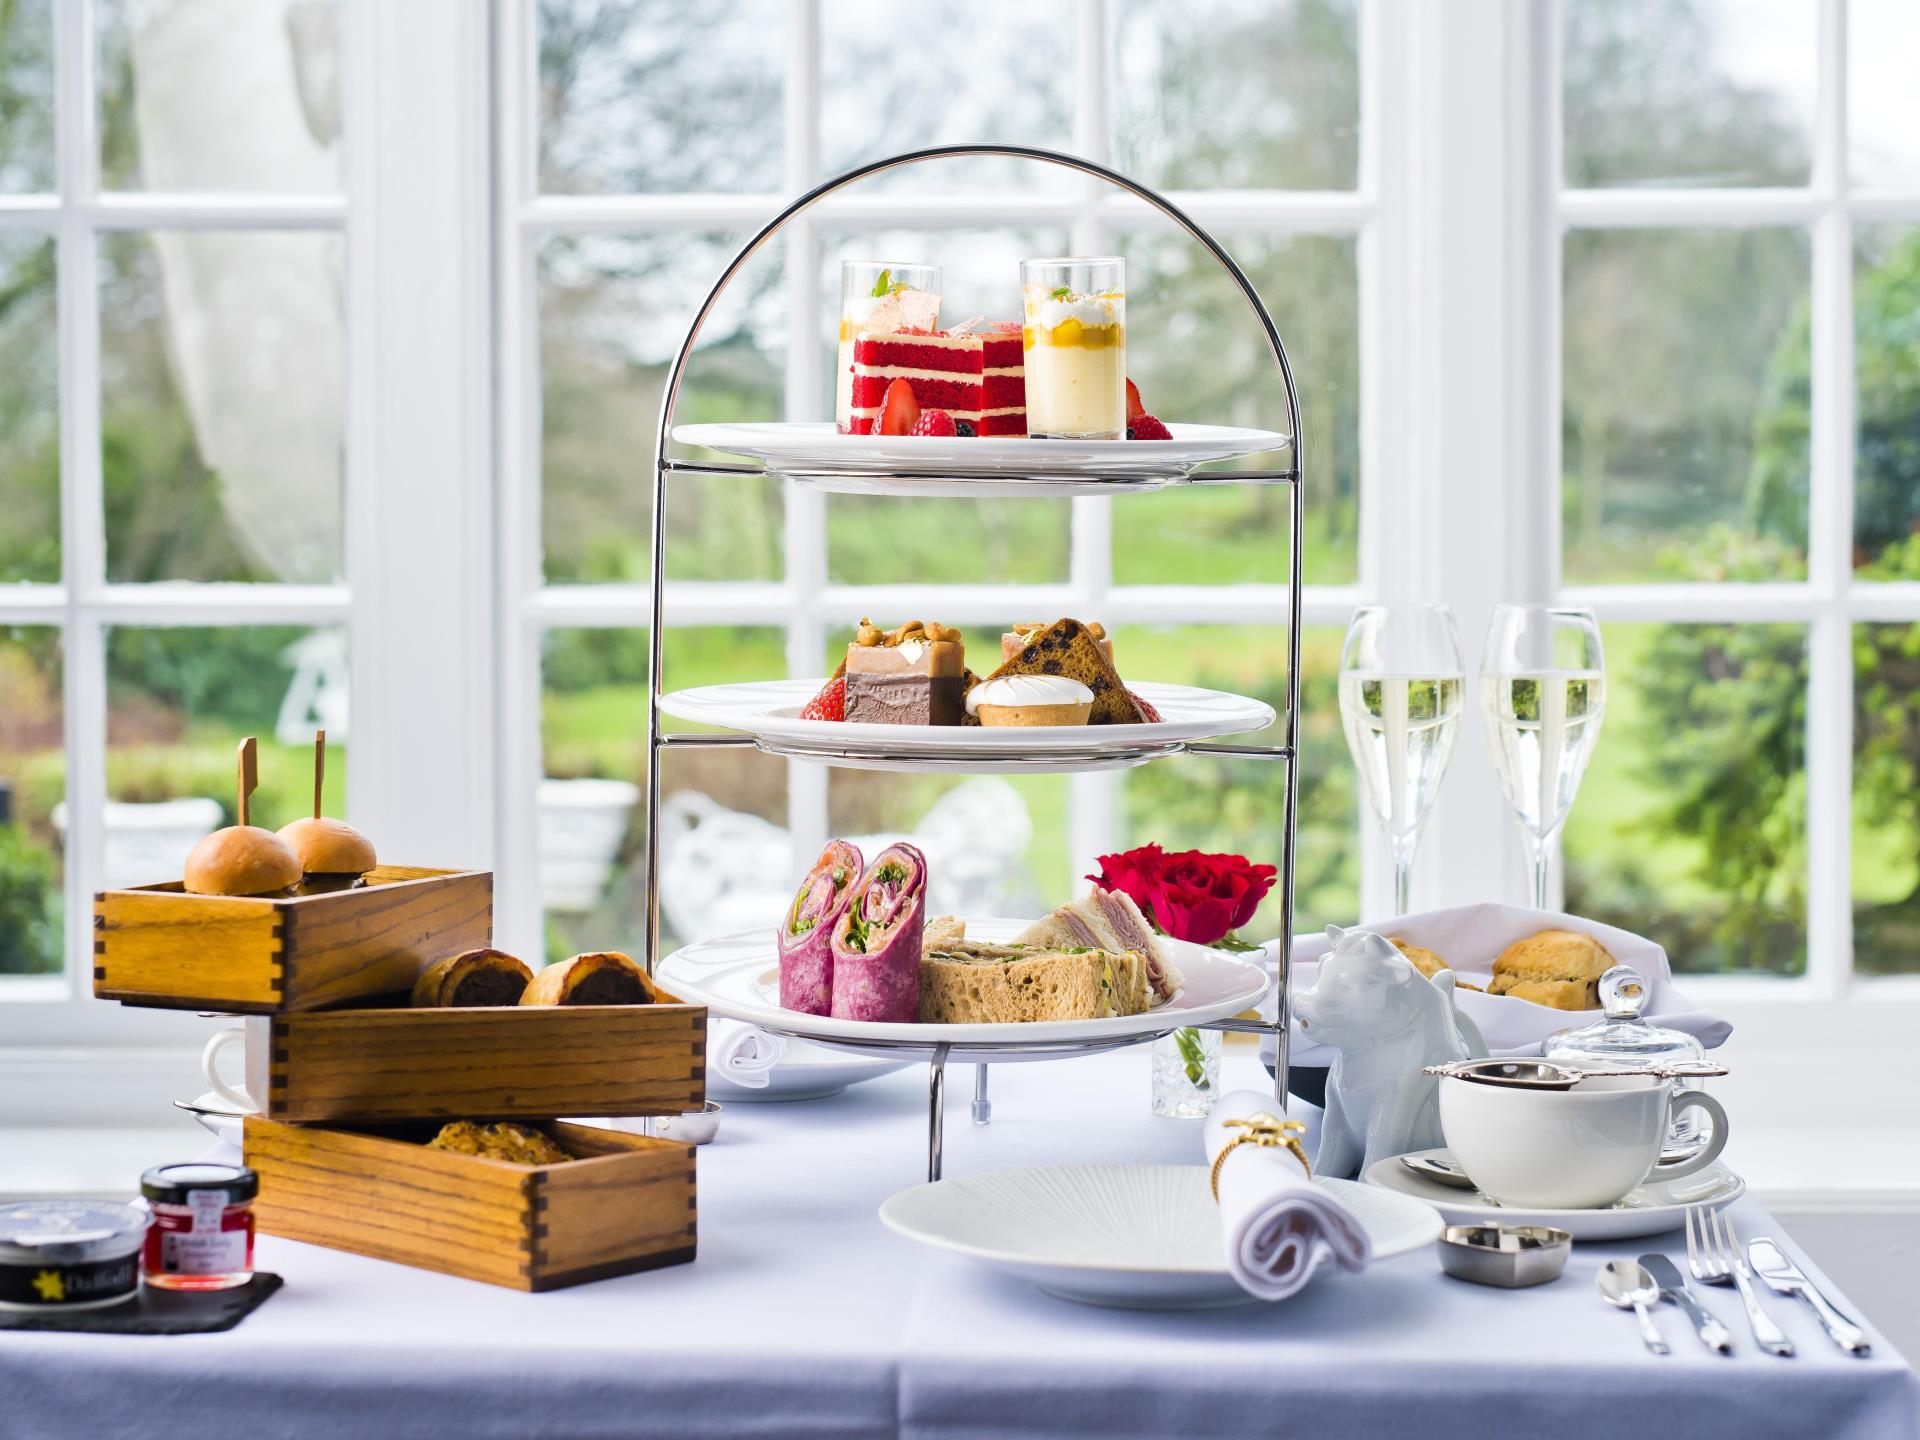 Afternoon Tea at Plas Dinas Country House, Wales